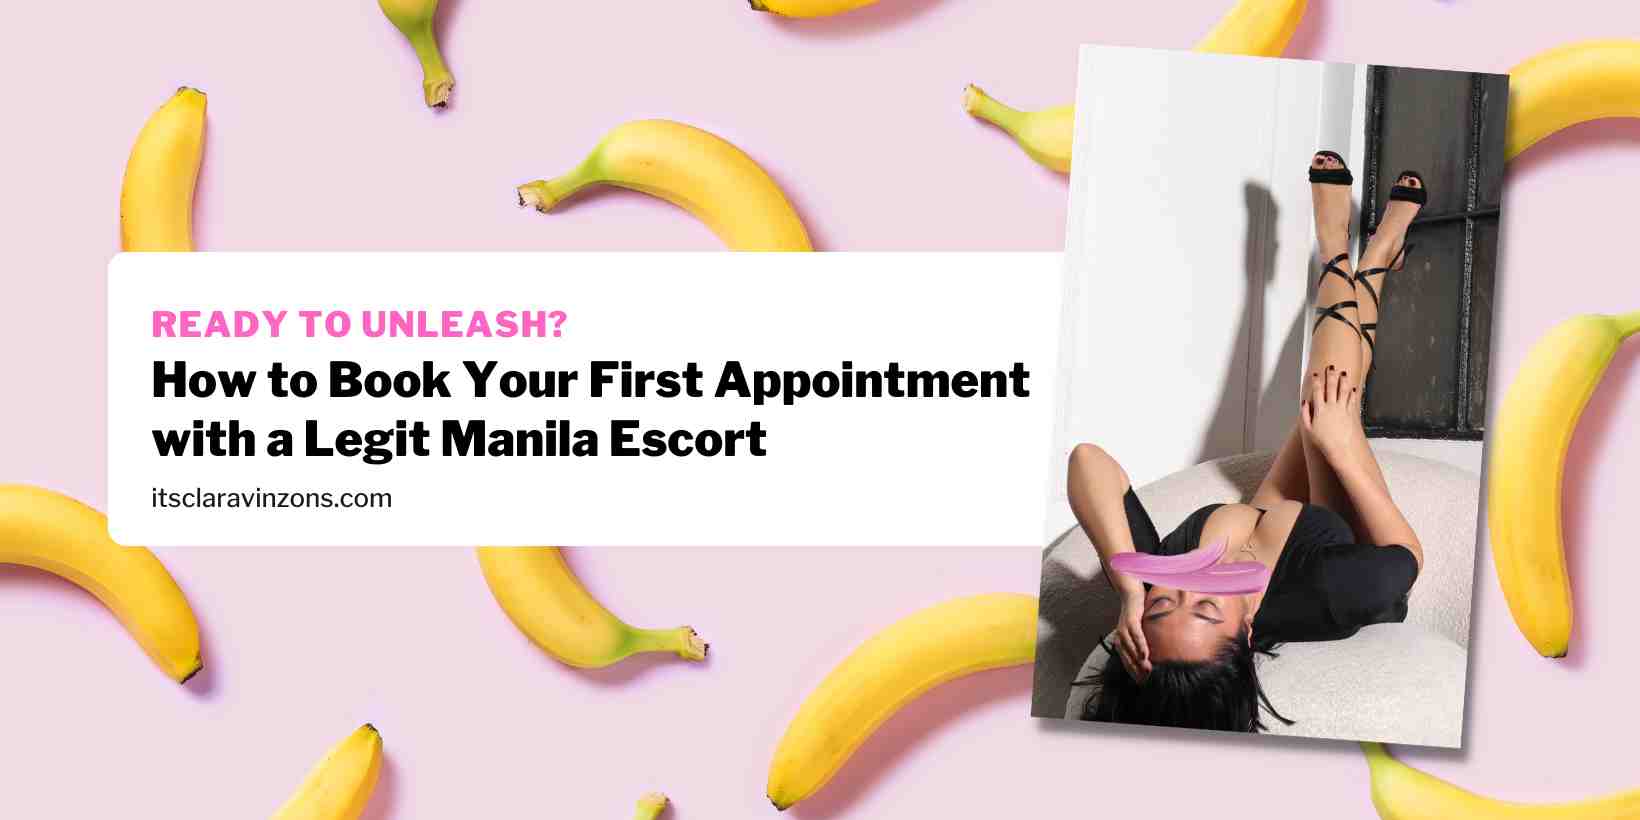 Legit Manila Escort Clara’s 6 Tips to Make Your First Appointment Stress & Hassle-Free